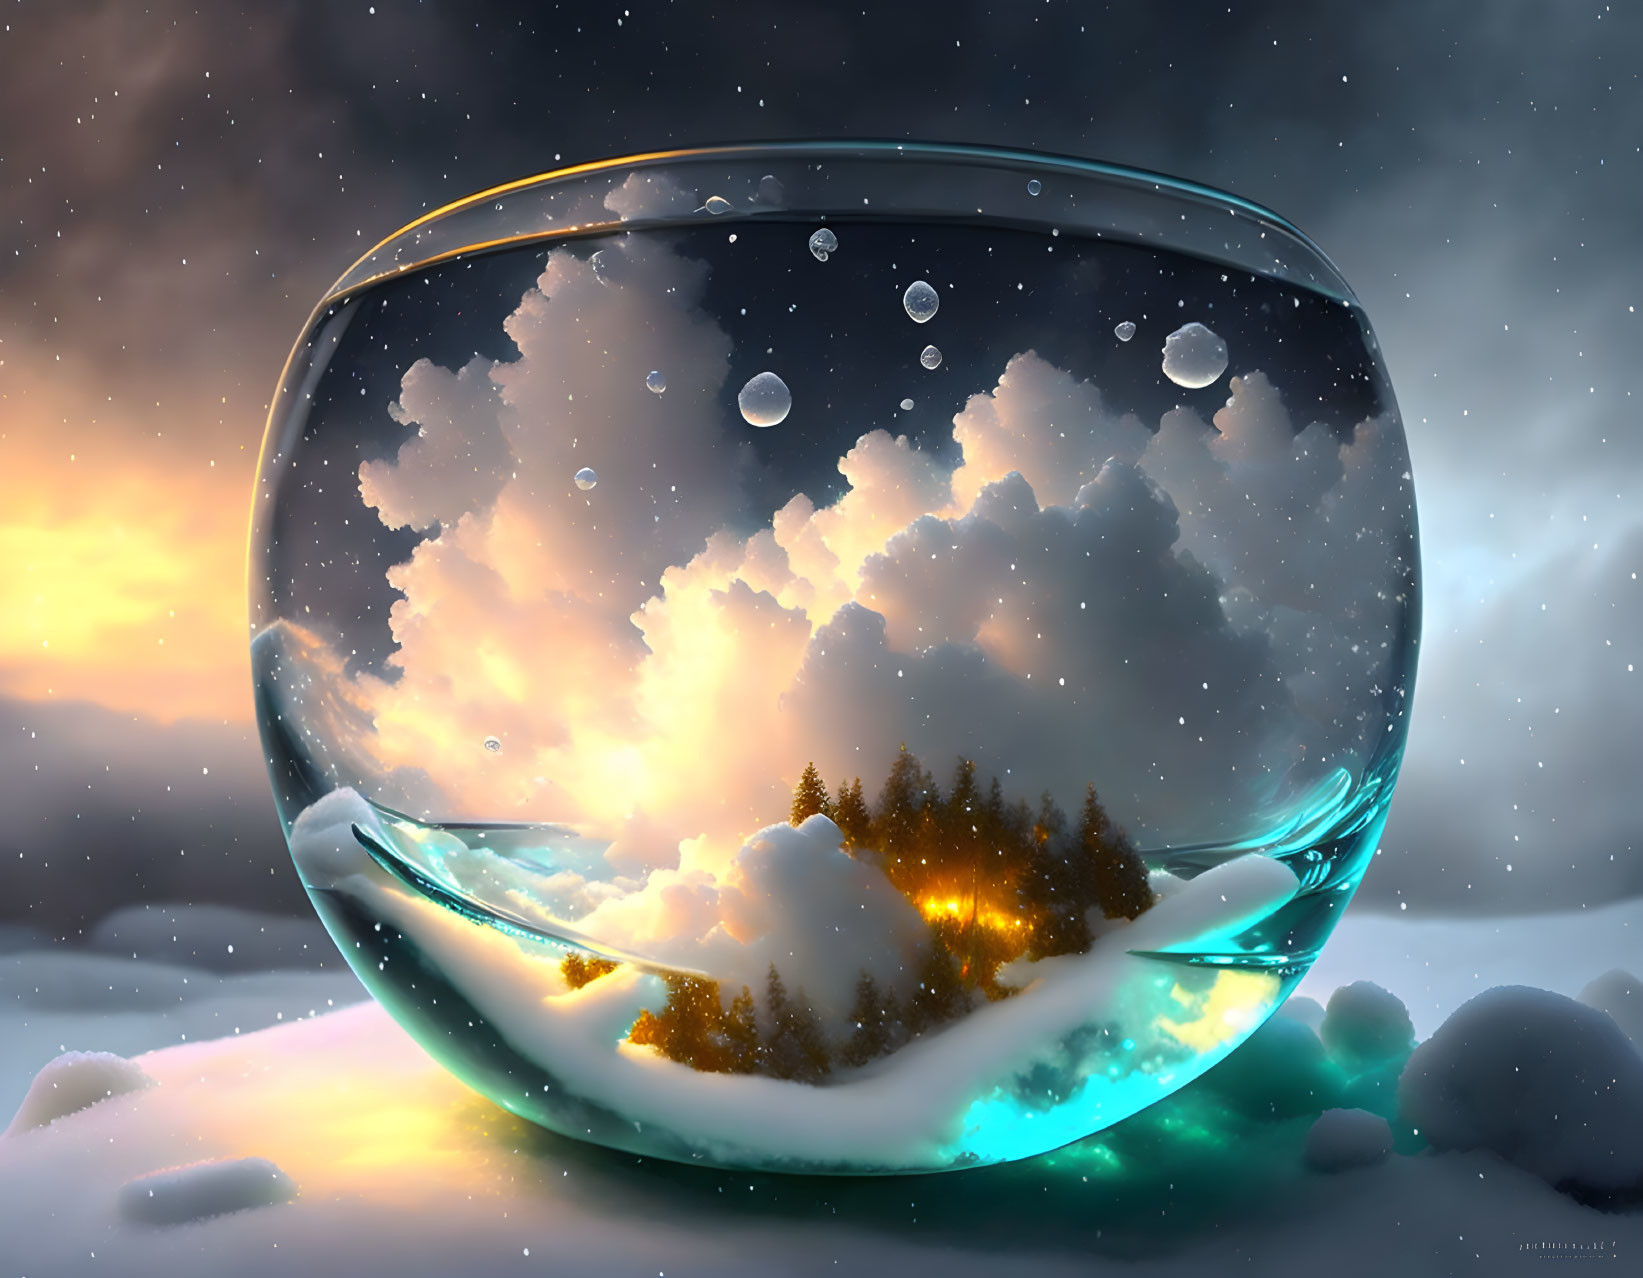 WINTER CLOUDS AND THUNDER INSIDE A GLASS TEA CUP